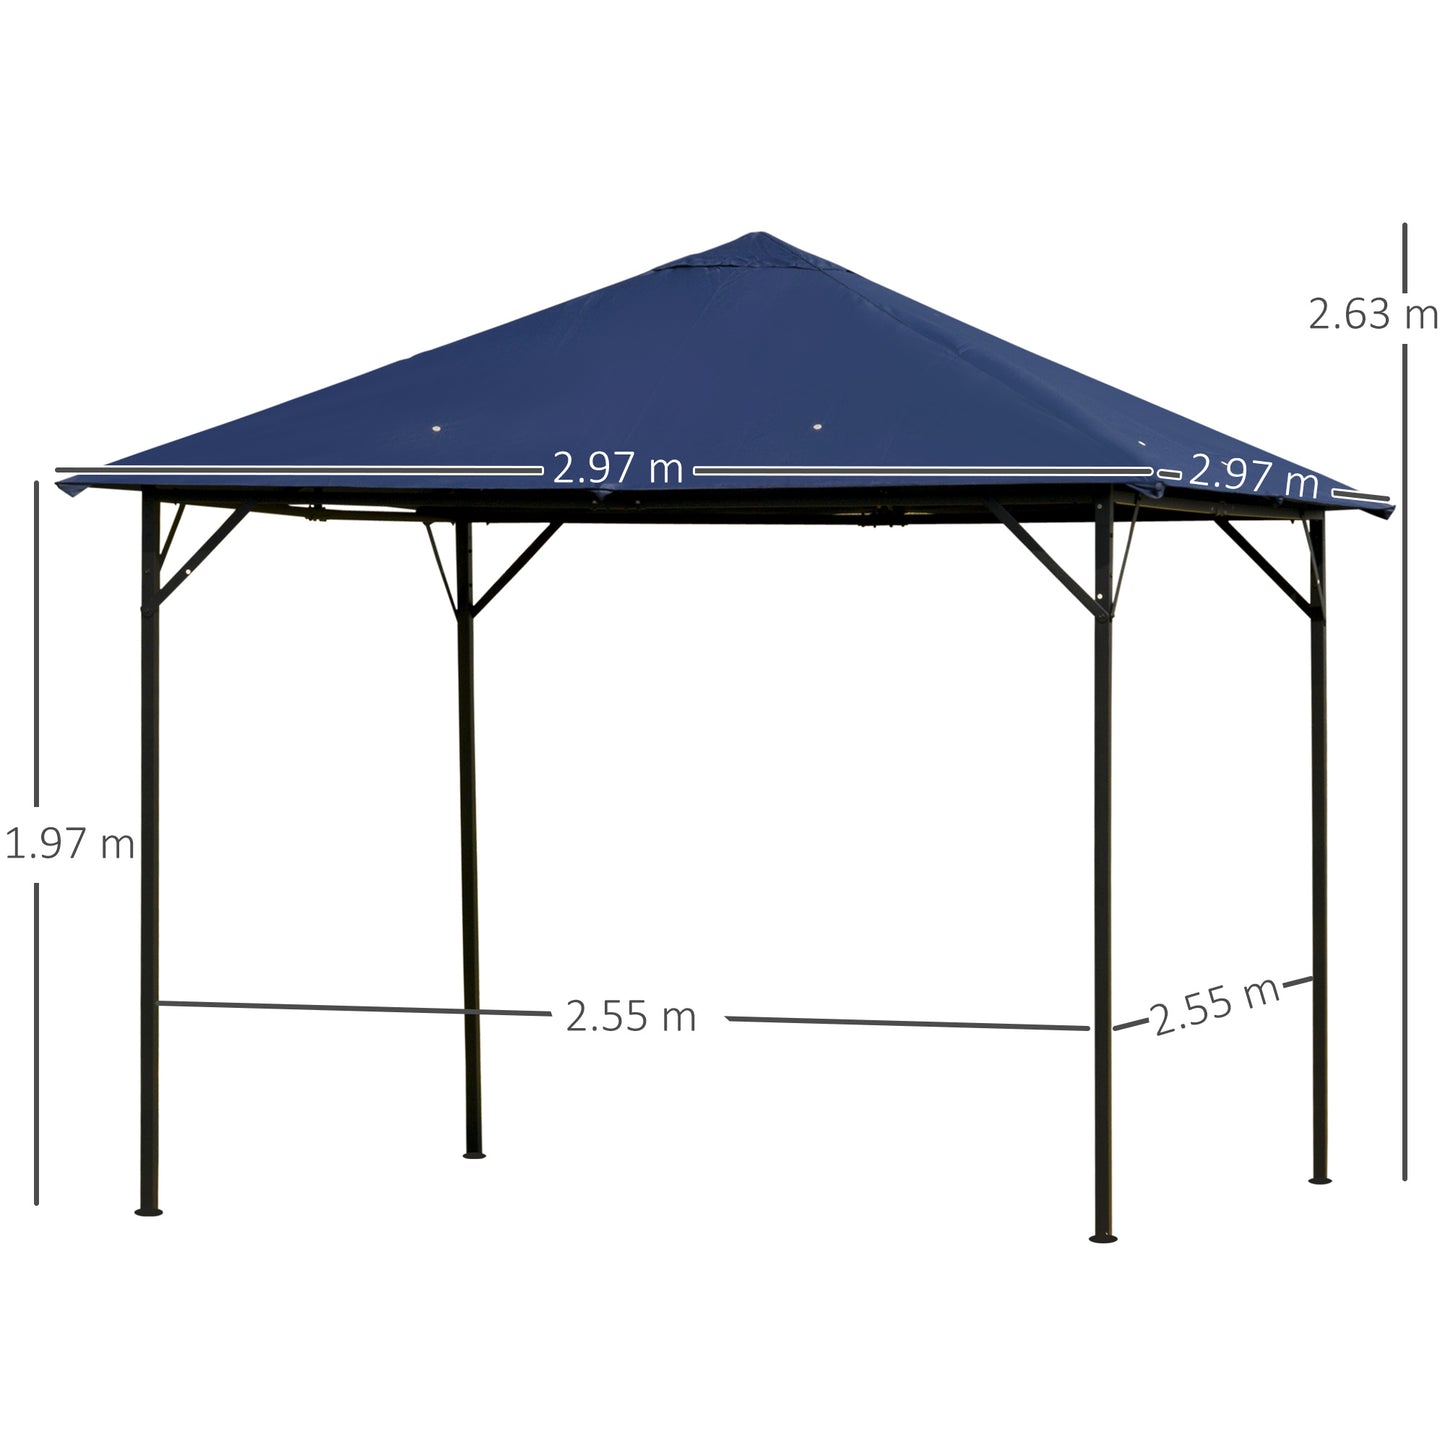 Outsunny 3 x 3(m) Gazebo Canopy Party Tent Patio Shelter Outdoor with Vent Dark Blue